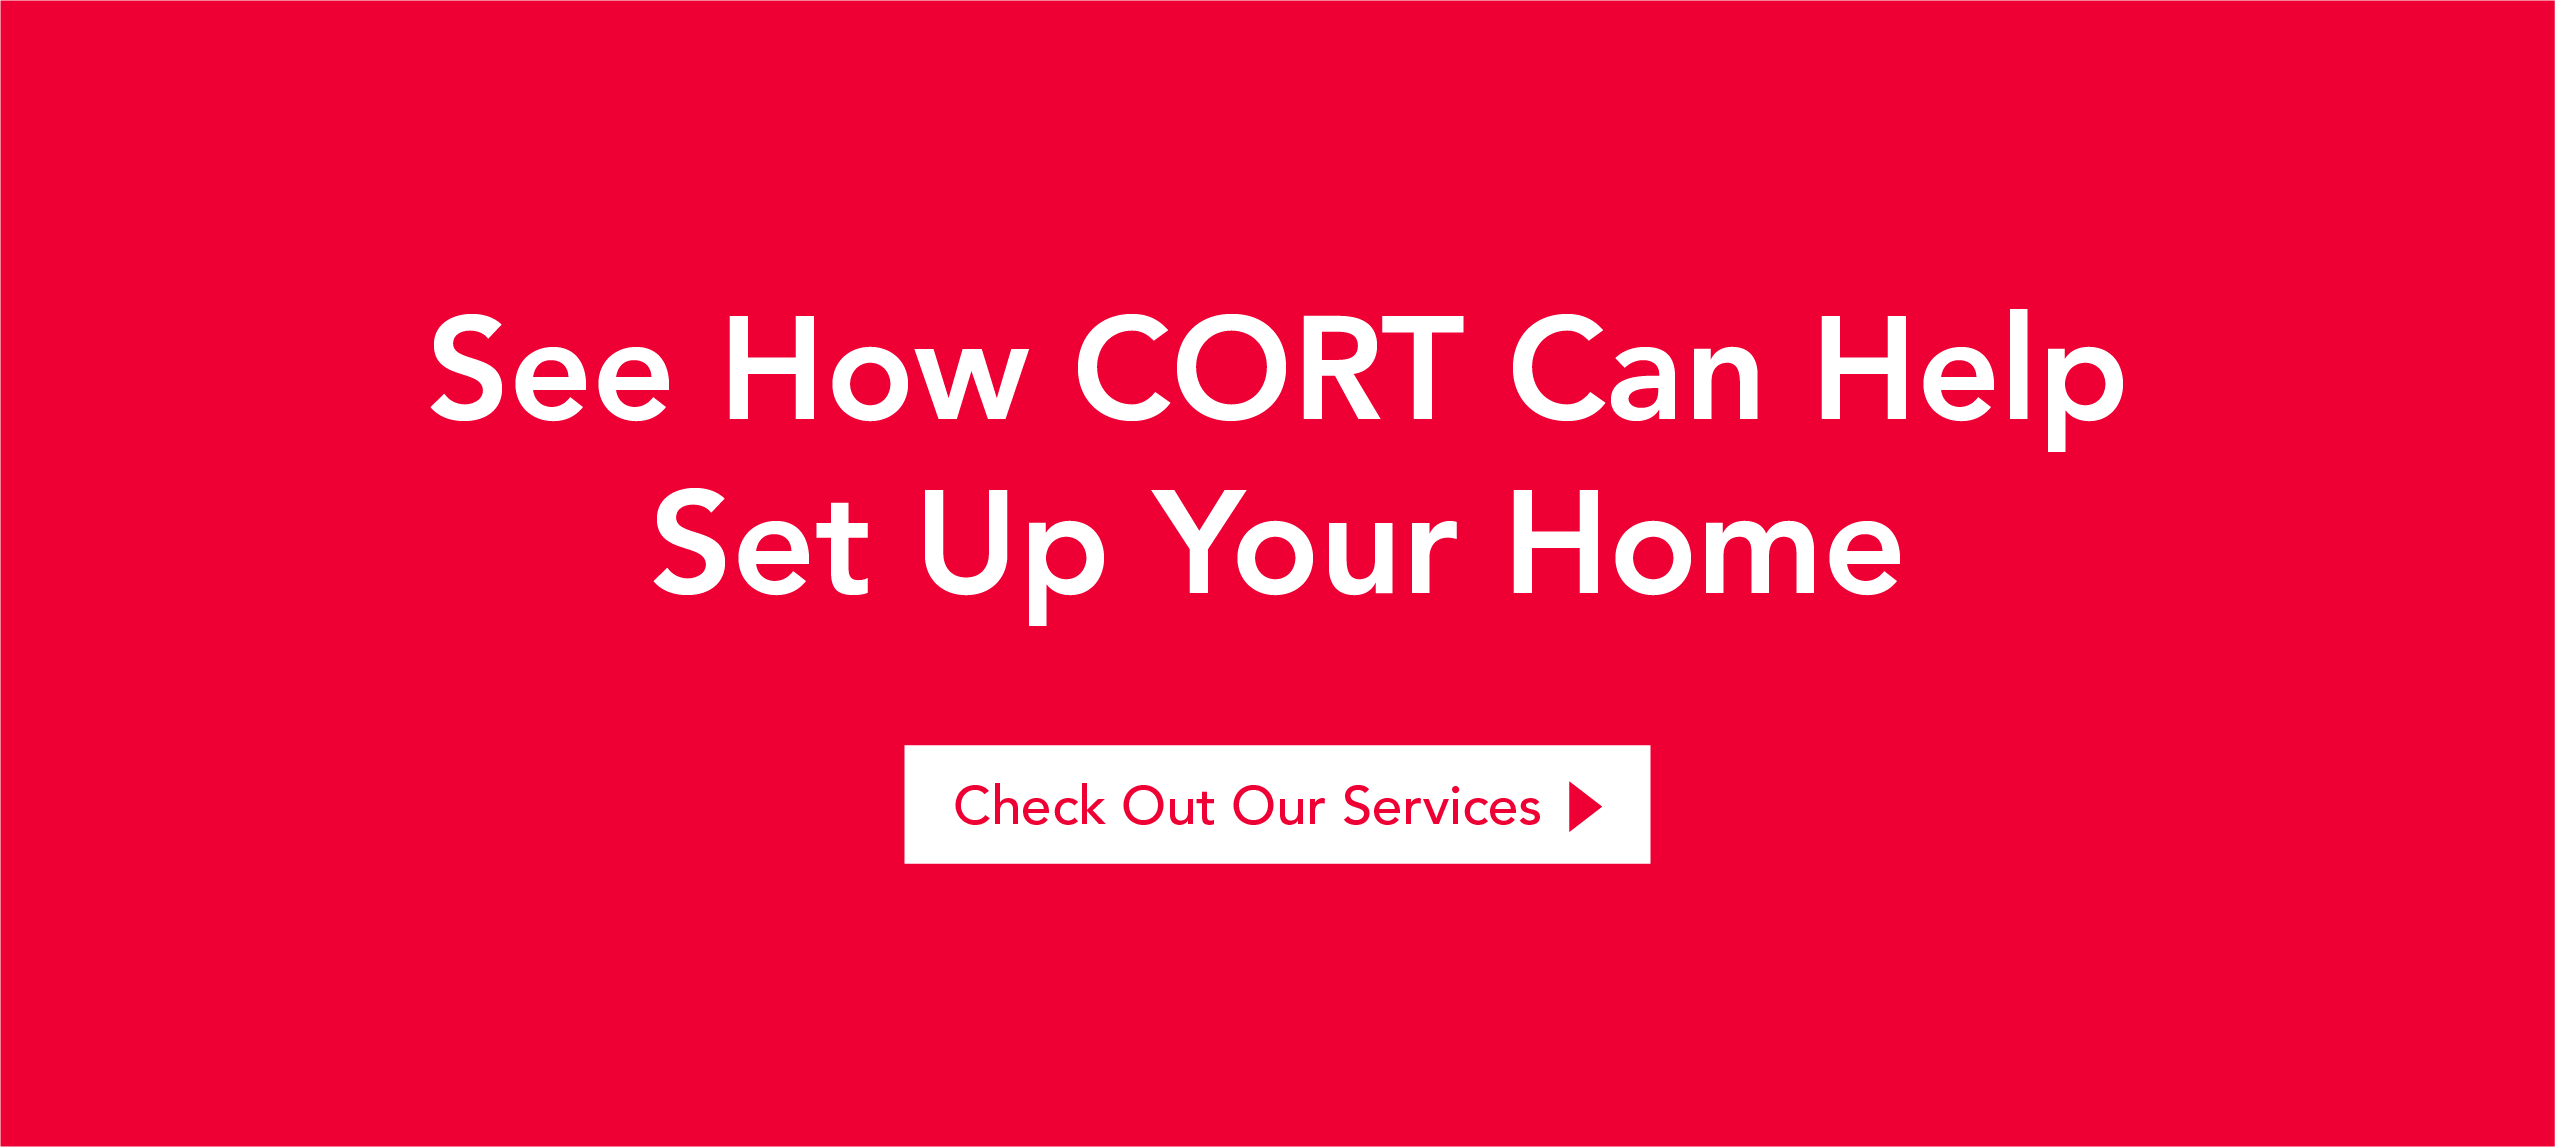 See how CORT can help